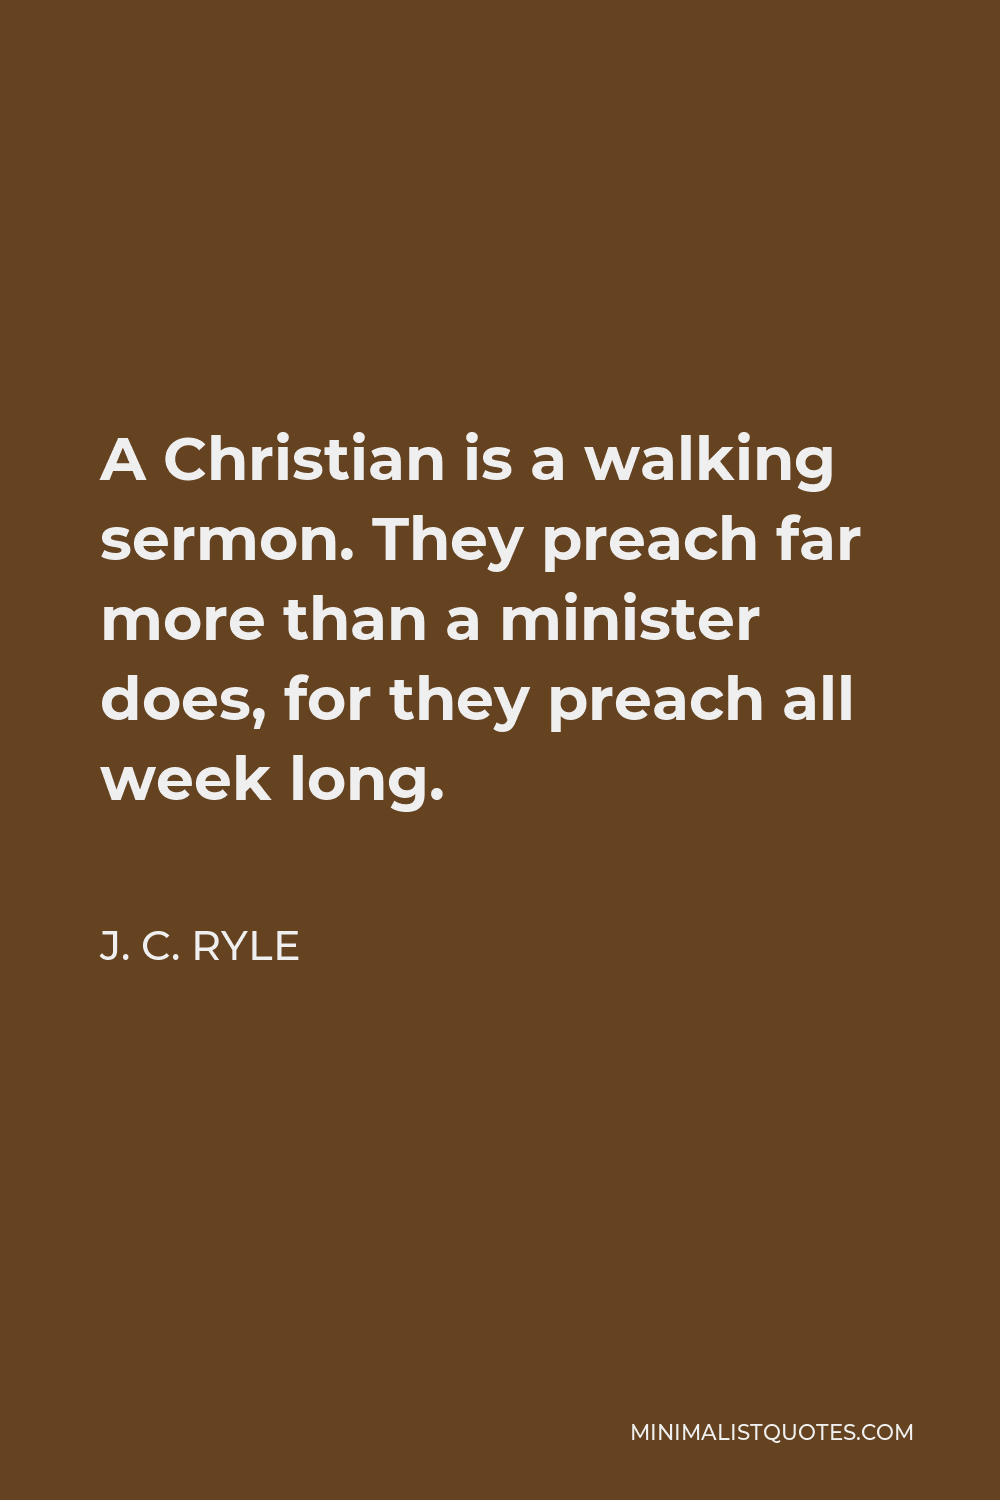 J. C. Ryle Quote - A Christian is a walking sermon. They preach far more than a minister does, for they preach all week long.